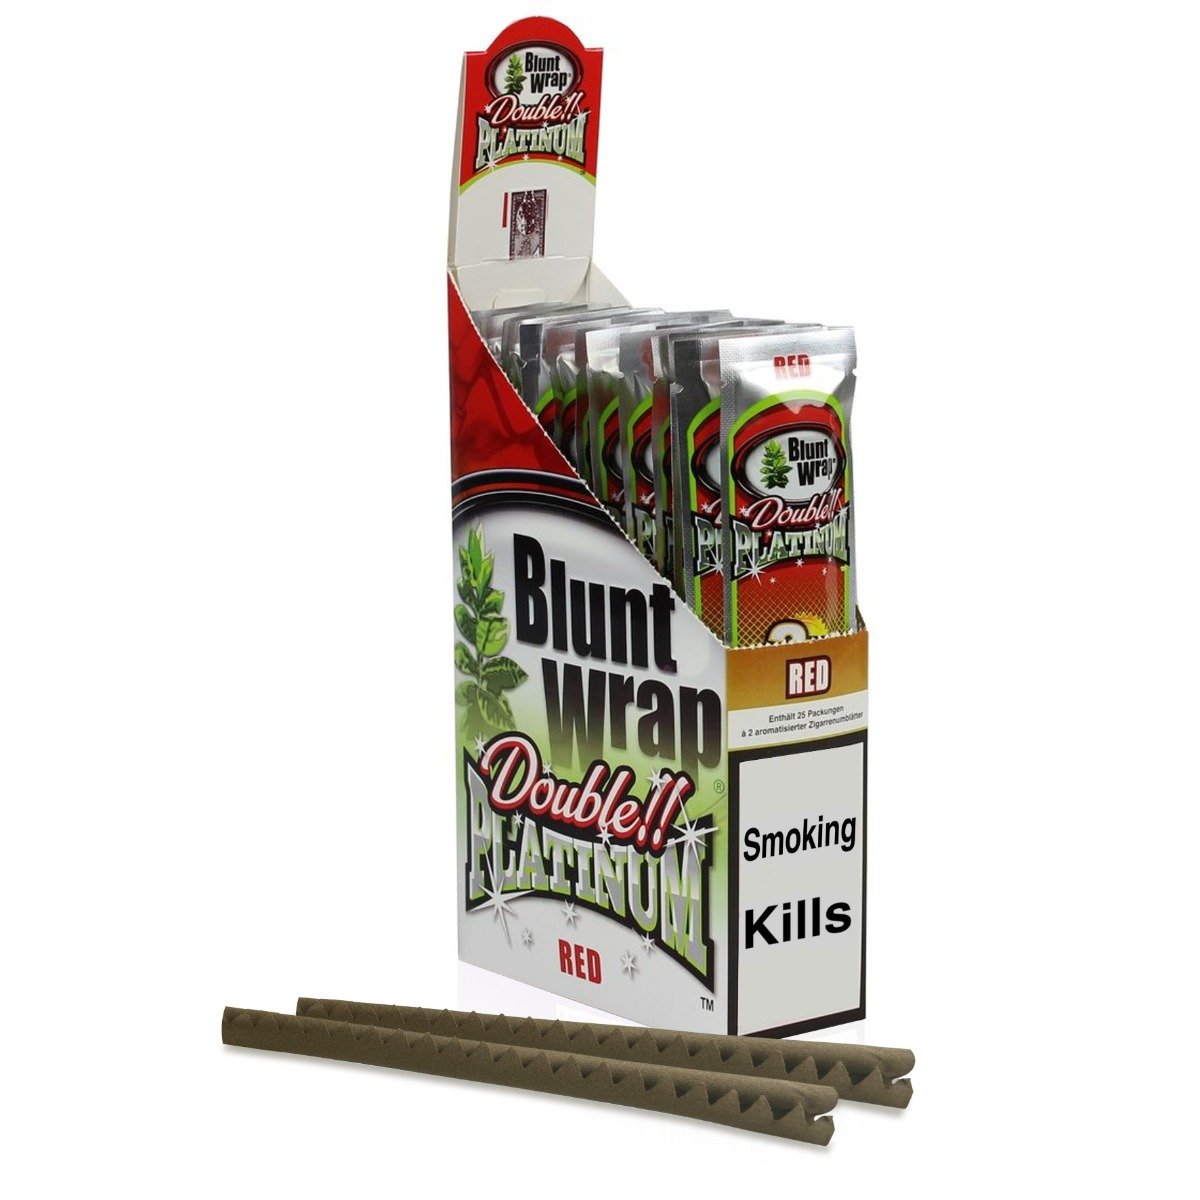 Blunt wrap double platinum - Red (Previously strawberry kiwi) - pack of 2